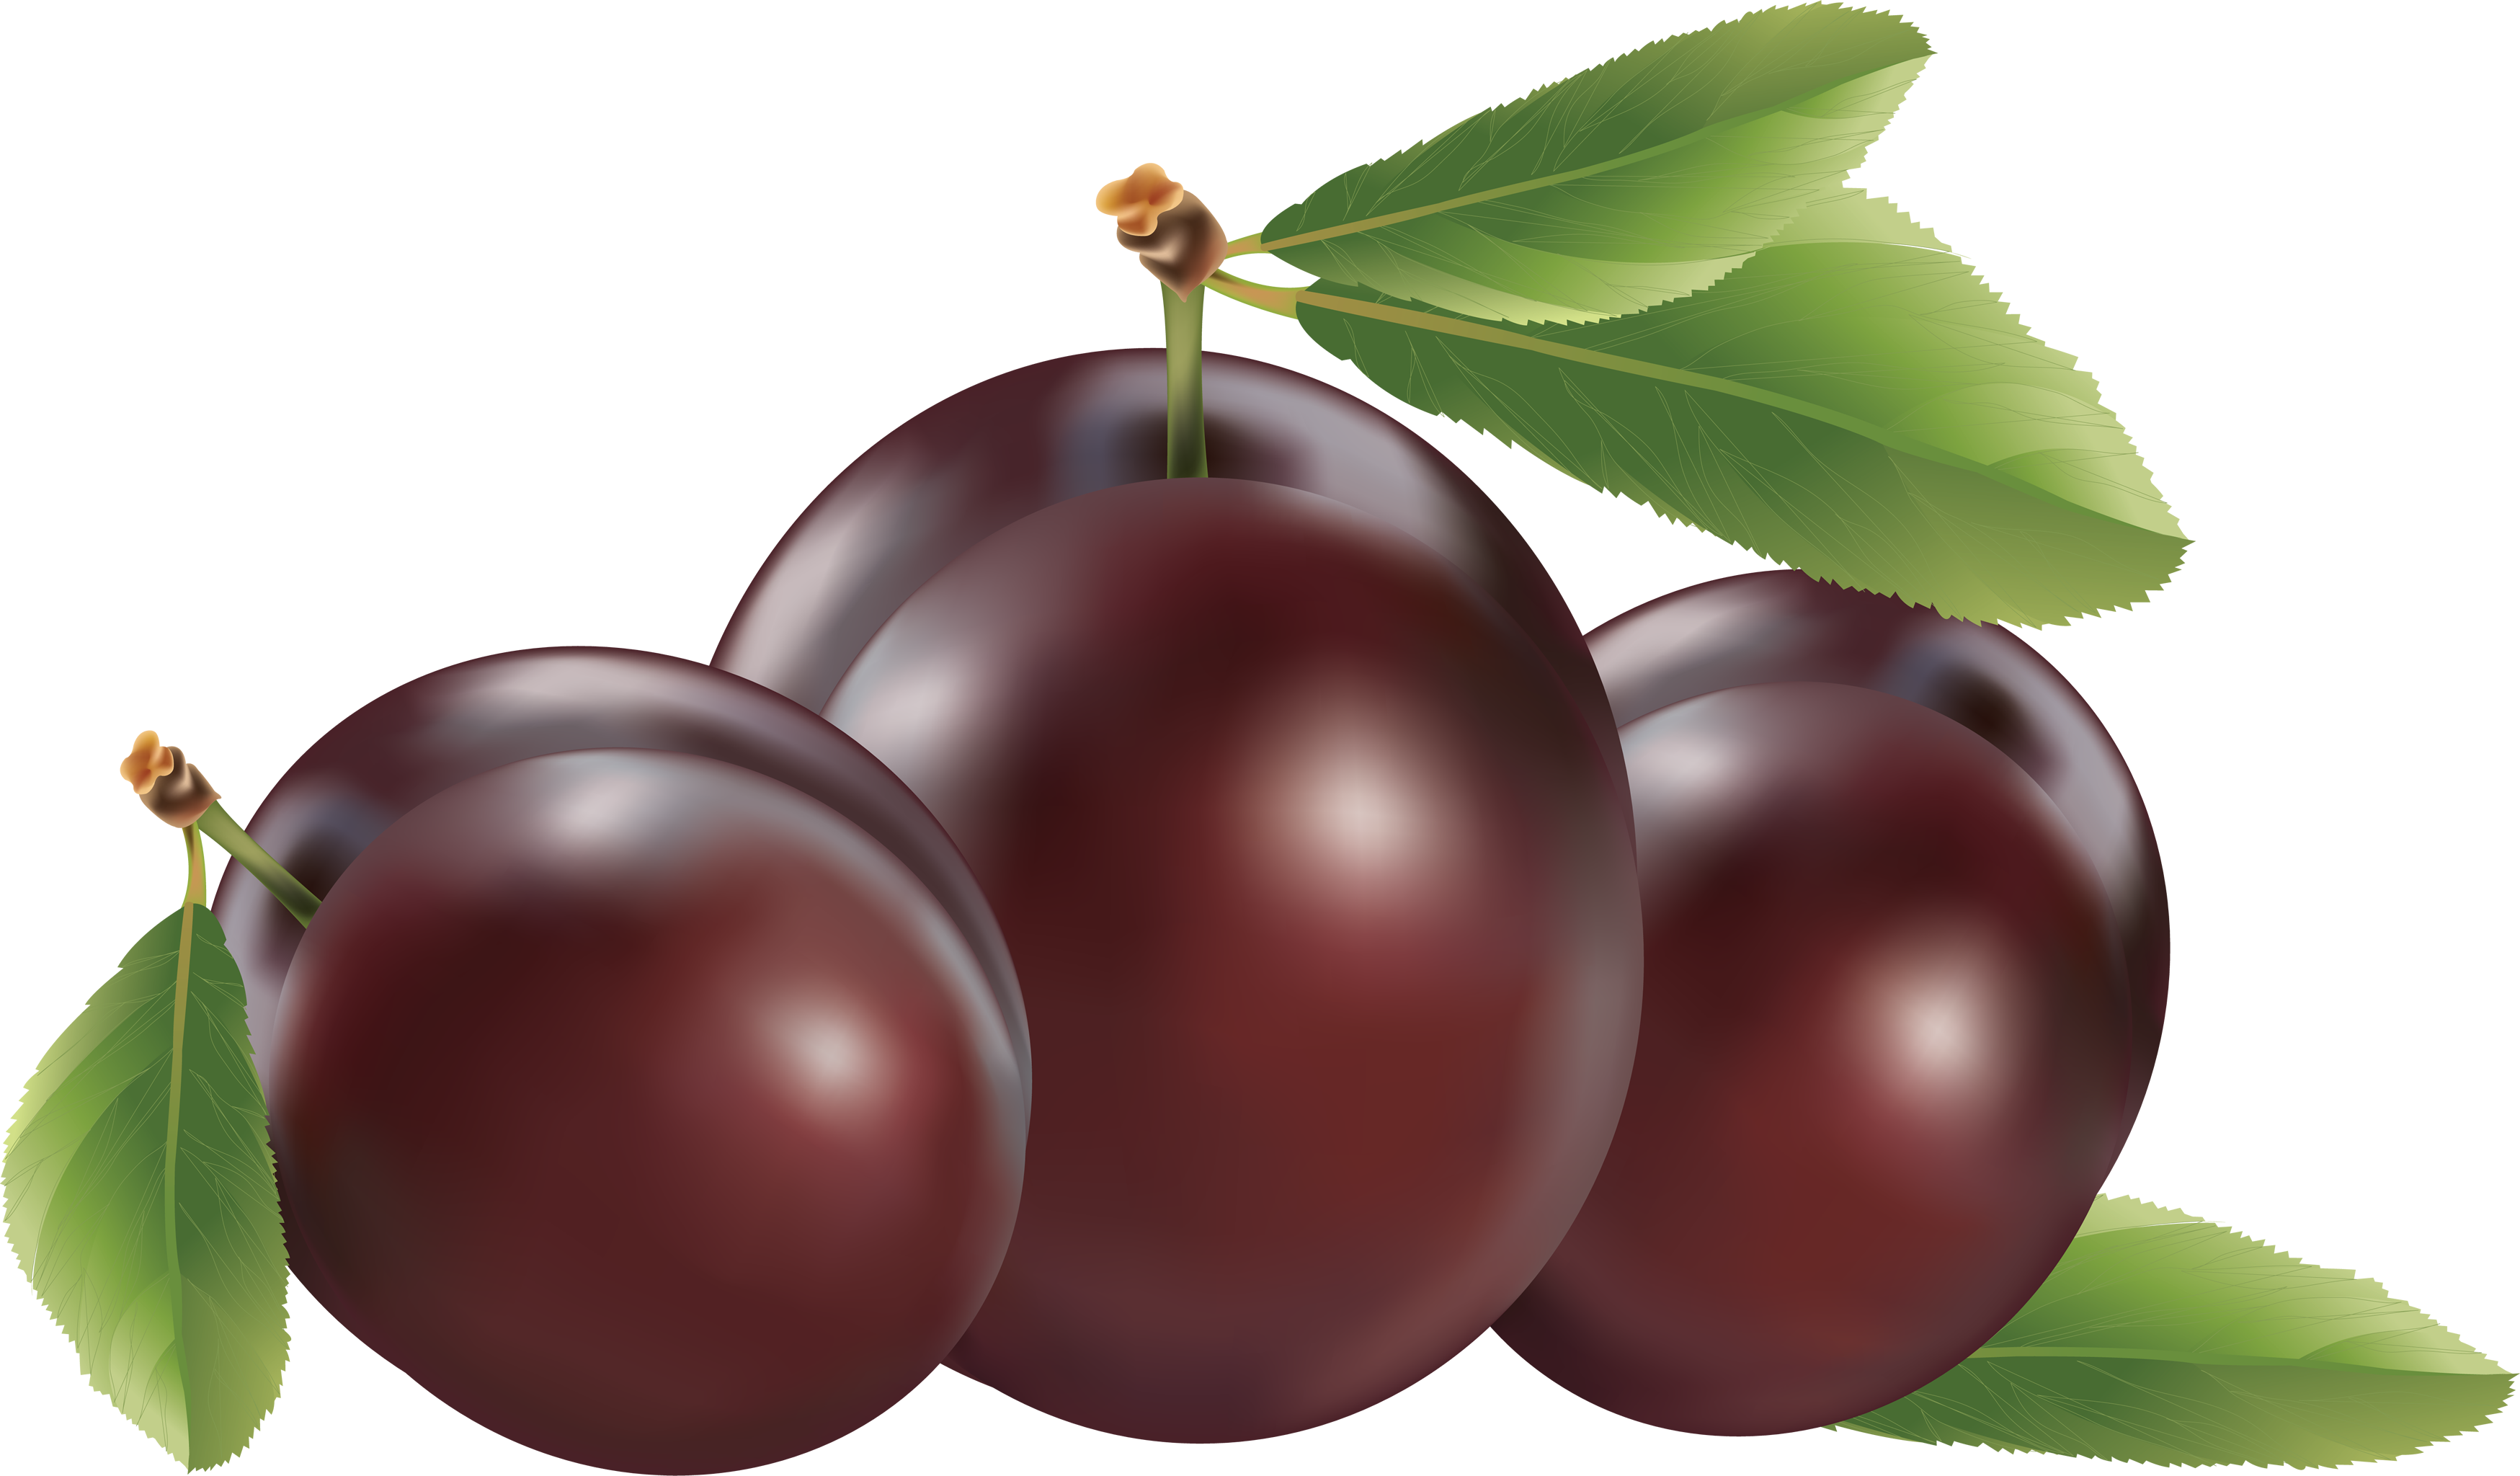 Png image purepng free. Plum clipart heart